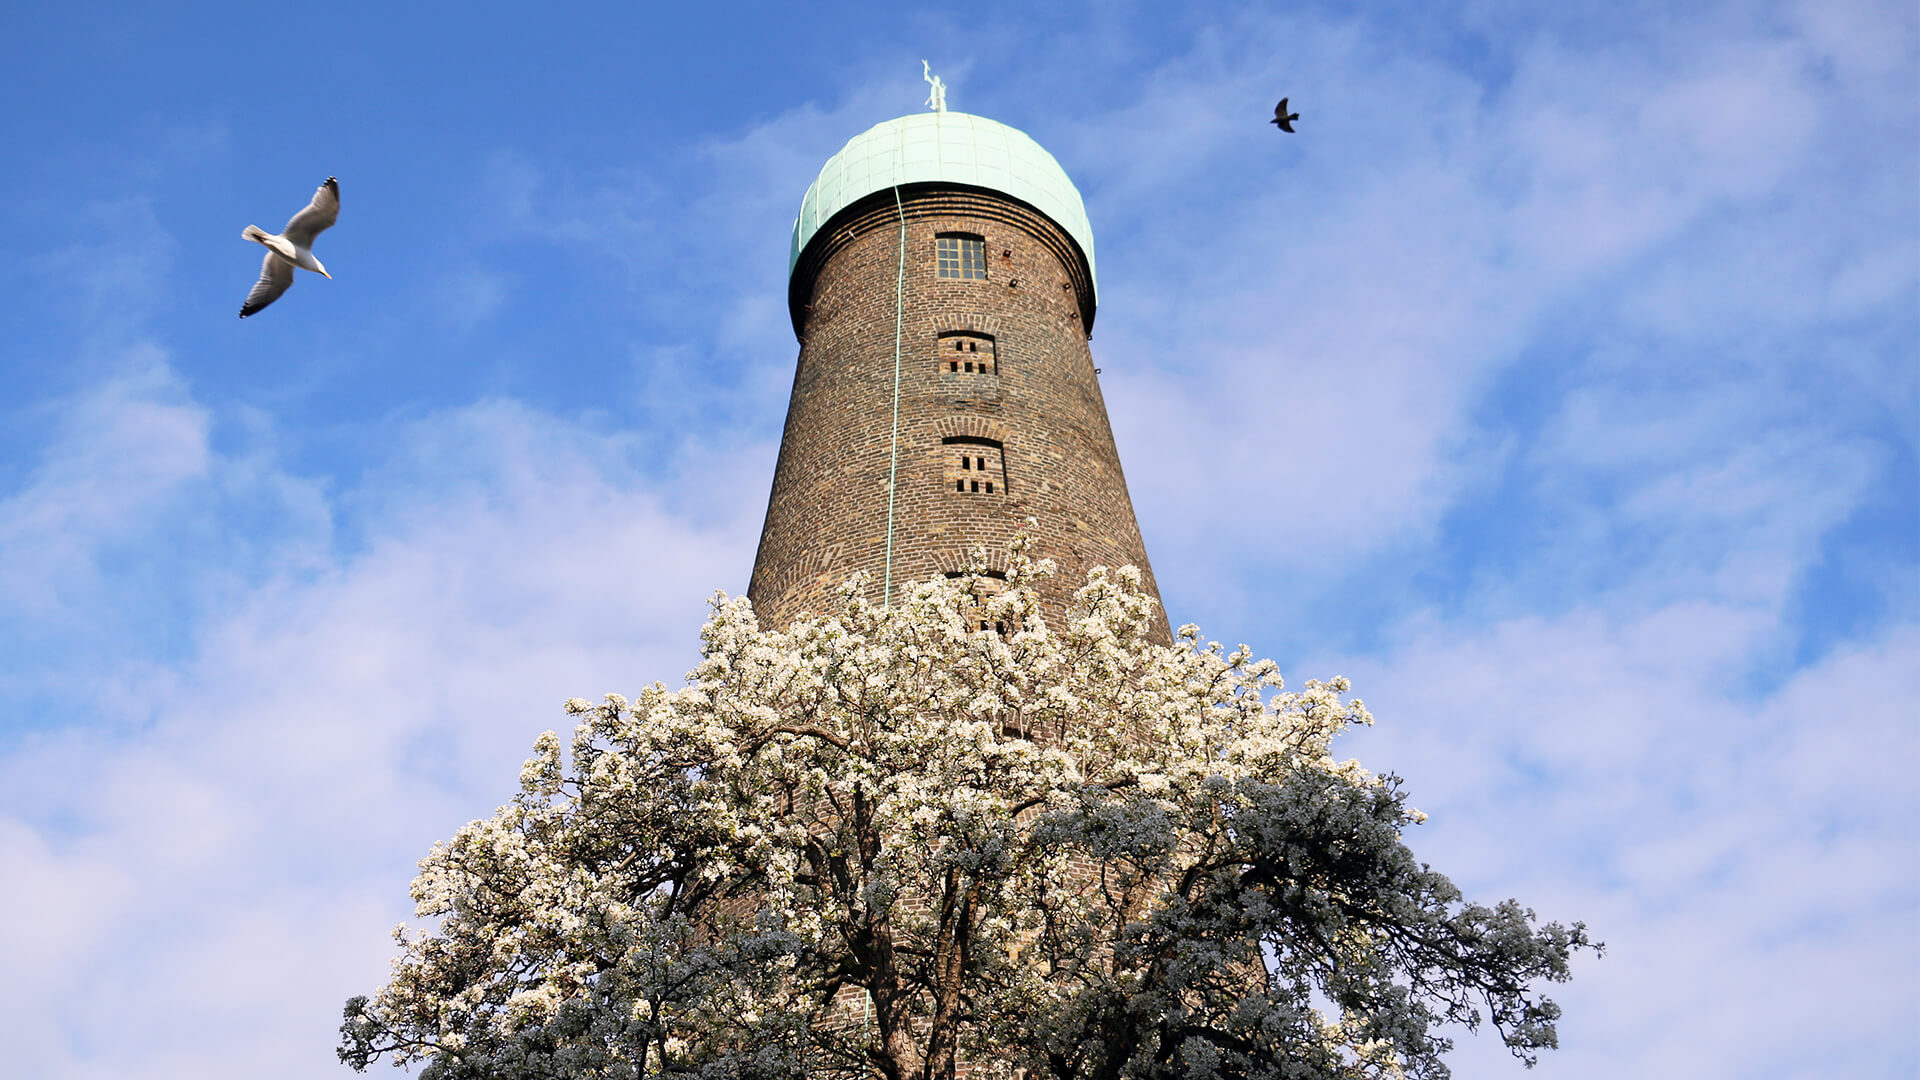 St Patrick's Tower rises above a pear tree with a seagull visible in the blue sky